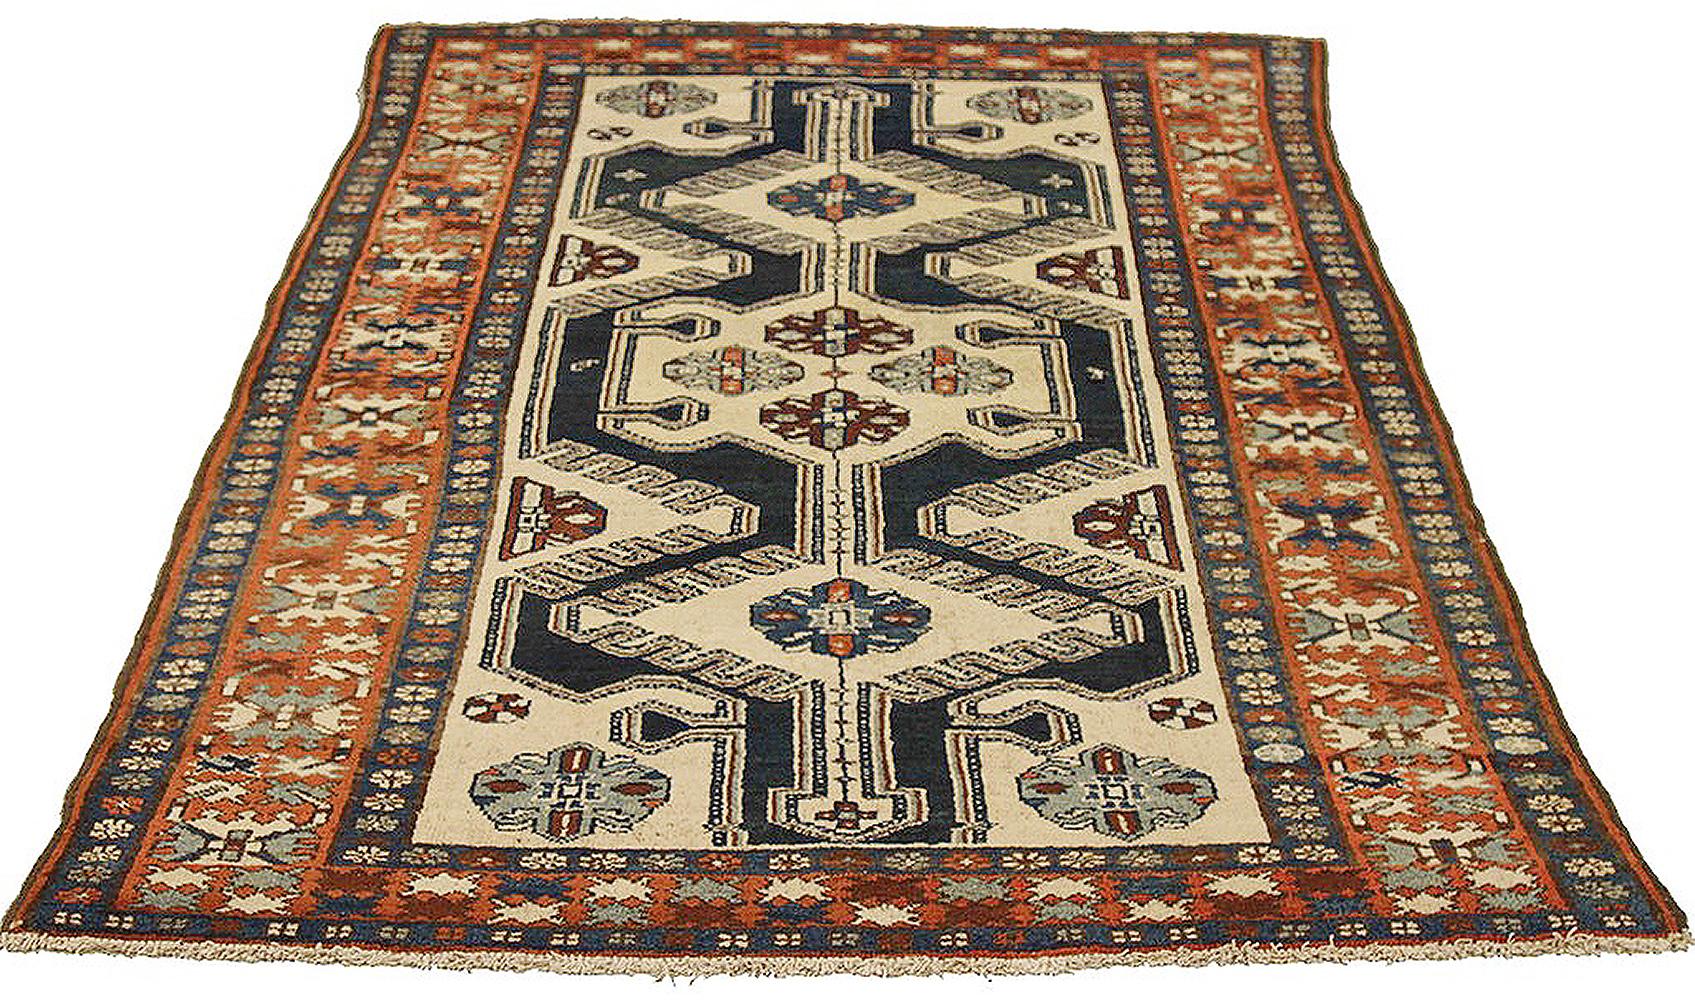 Antique Persian rug handwoven from the finest sheep’s wool and colored with all-natural vegetable dyes that are safe for humans and pets. It’s a traditional Hamedan design featuring floral patterns in gray and beige on a black field. The details are